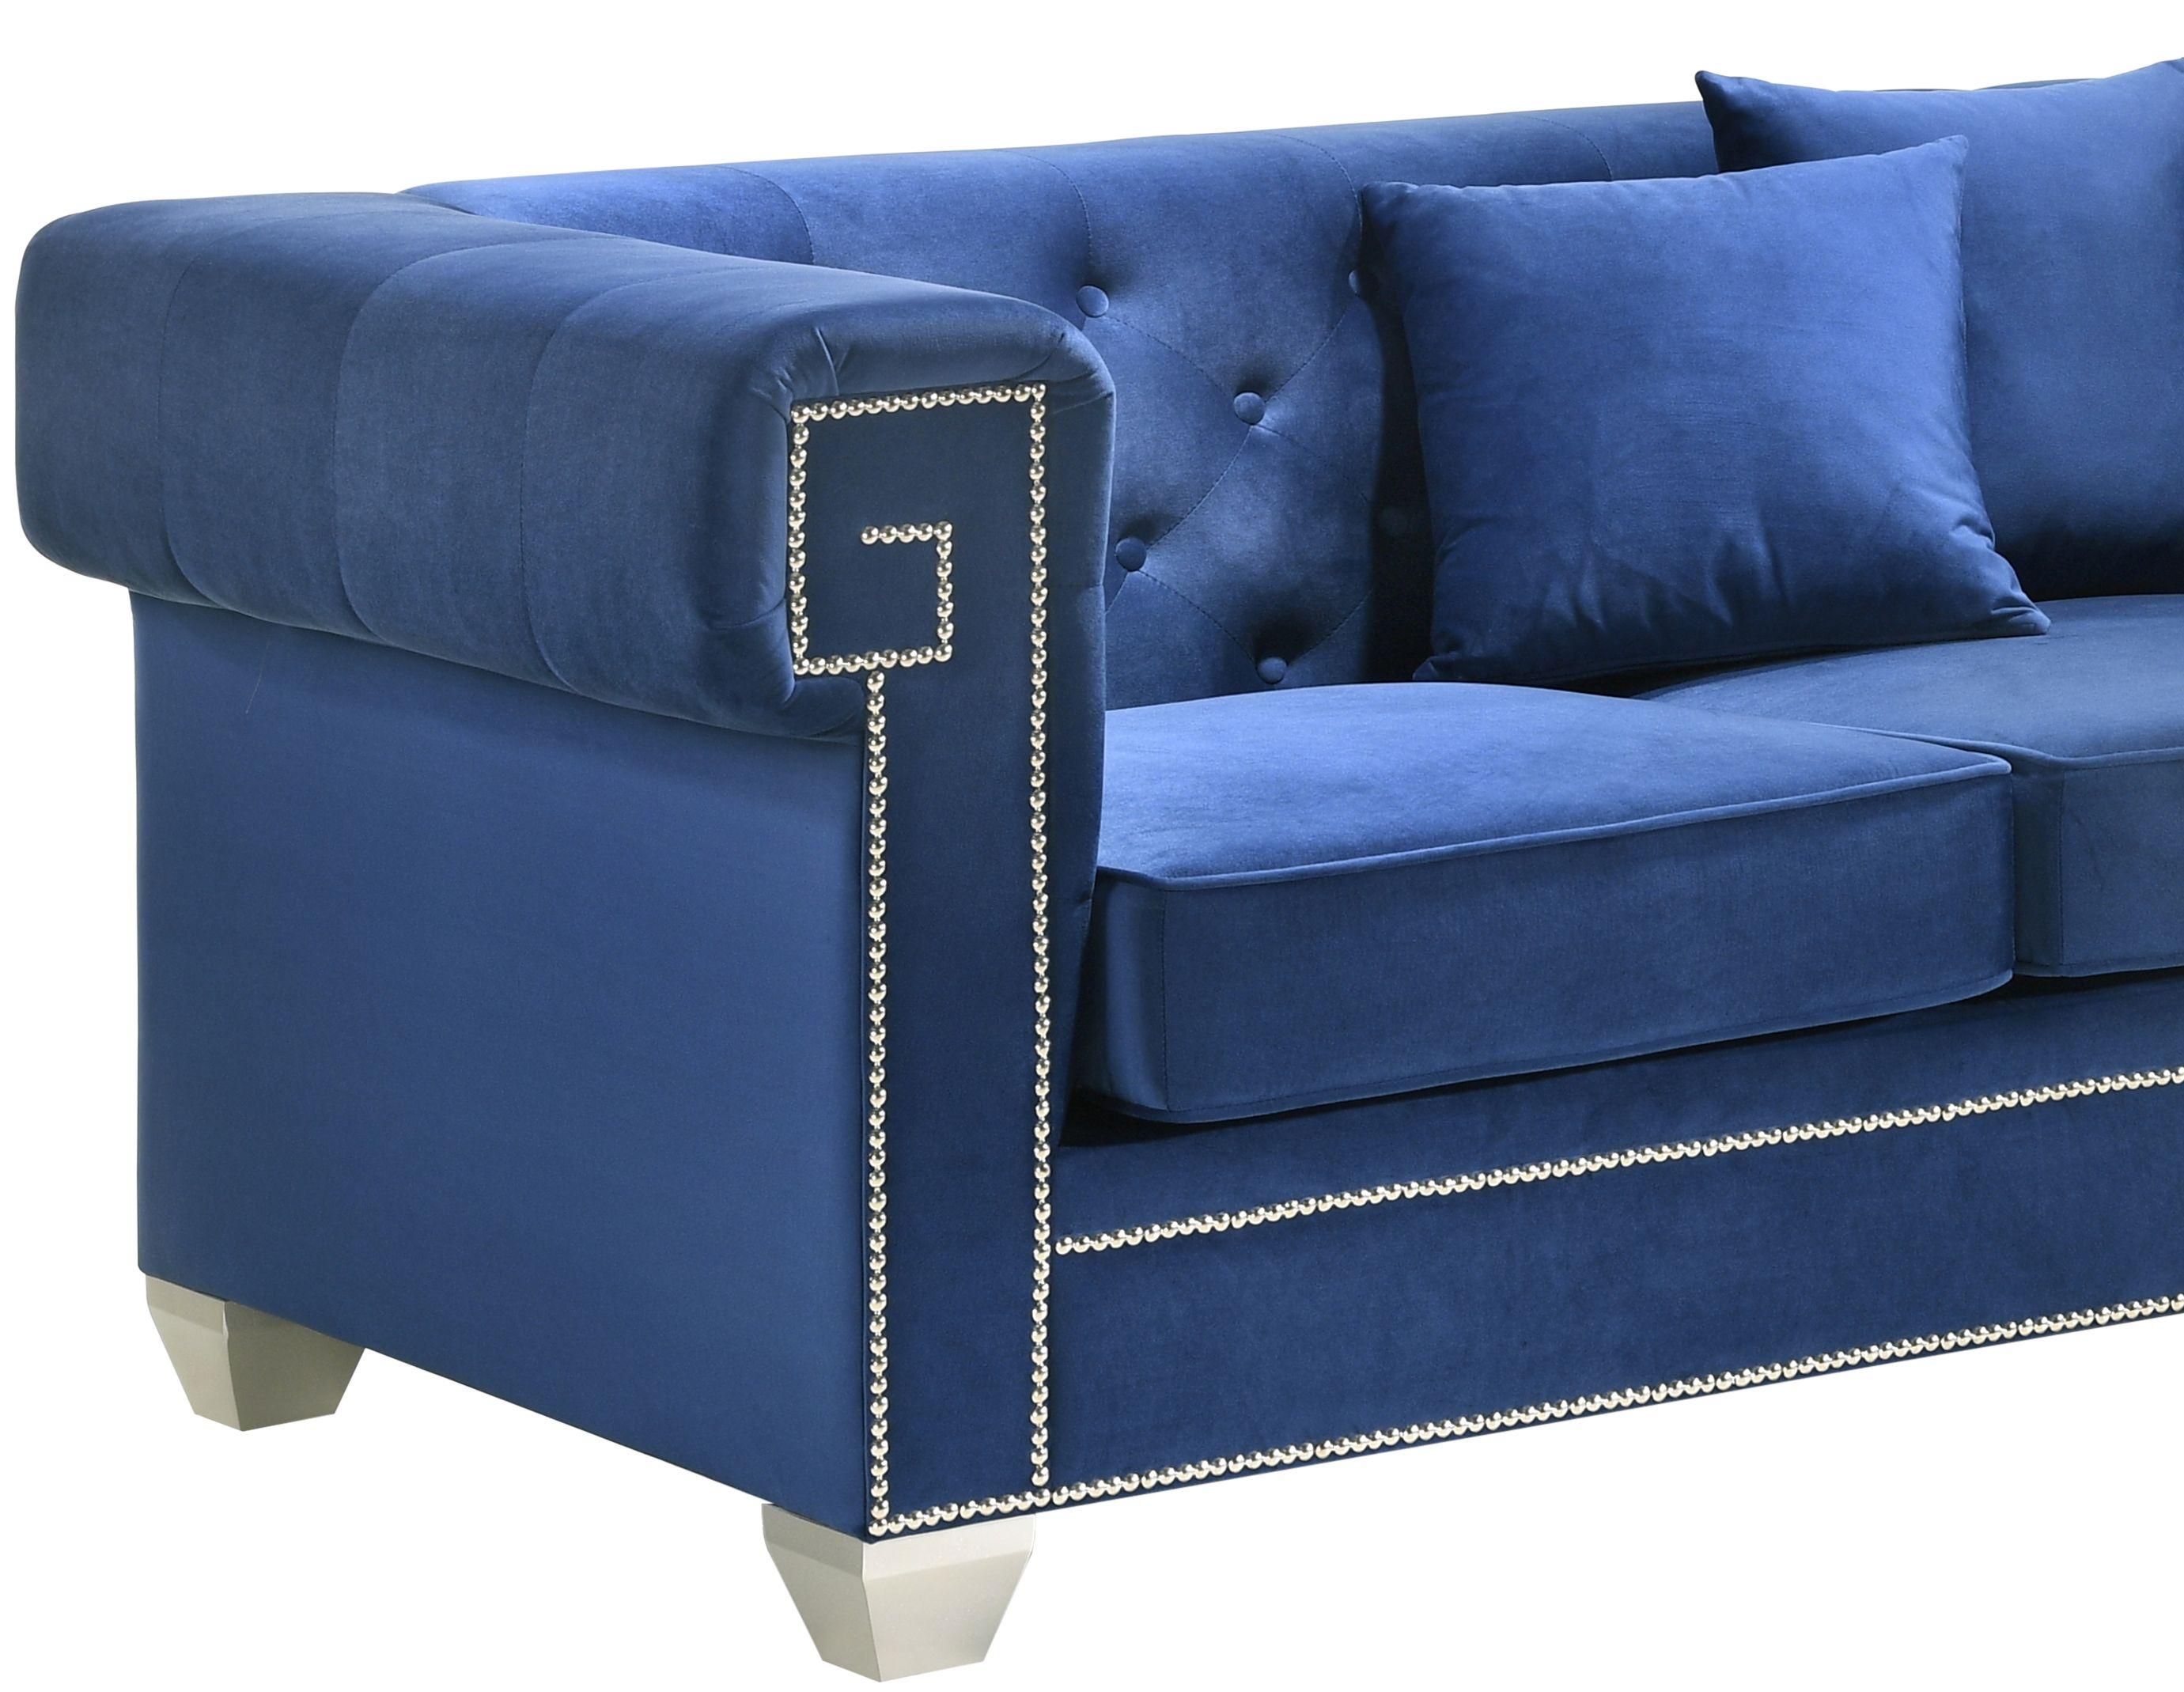 

    
Clover Blue-Set-2 Cosmos Furniture Sofa and Loveseat Set
